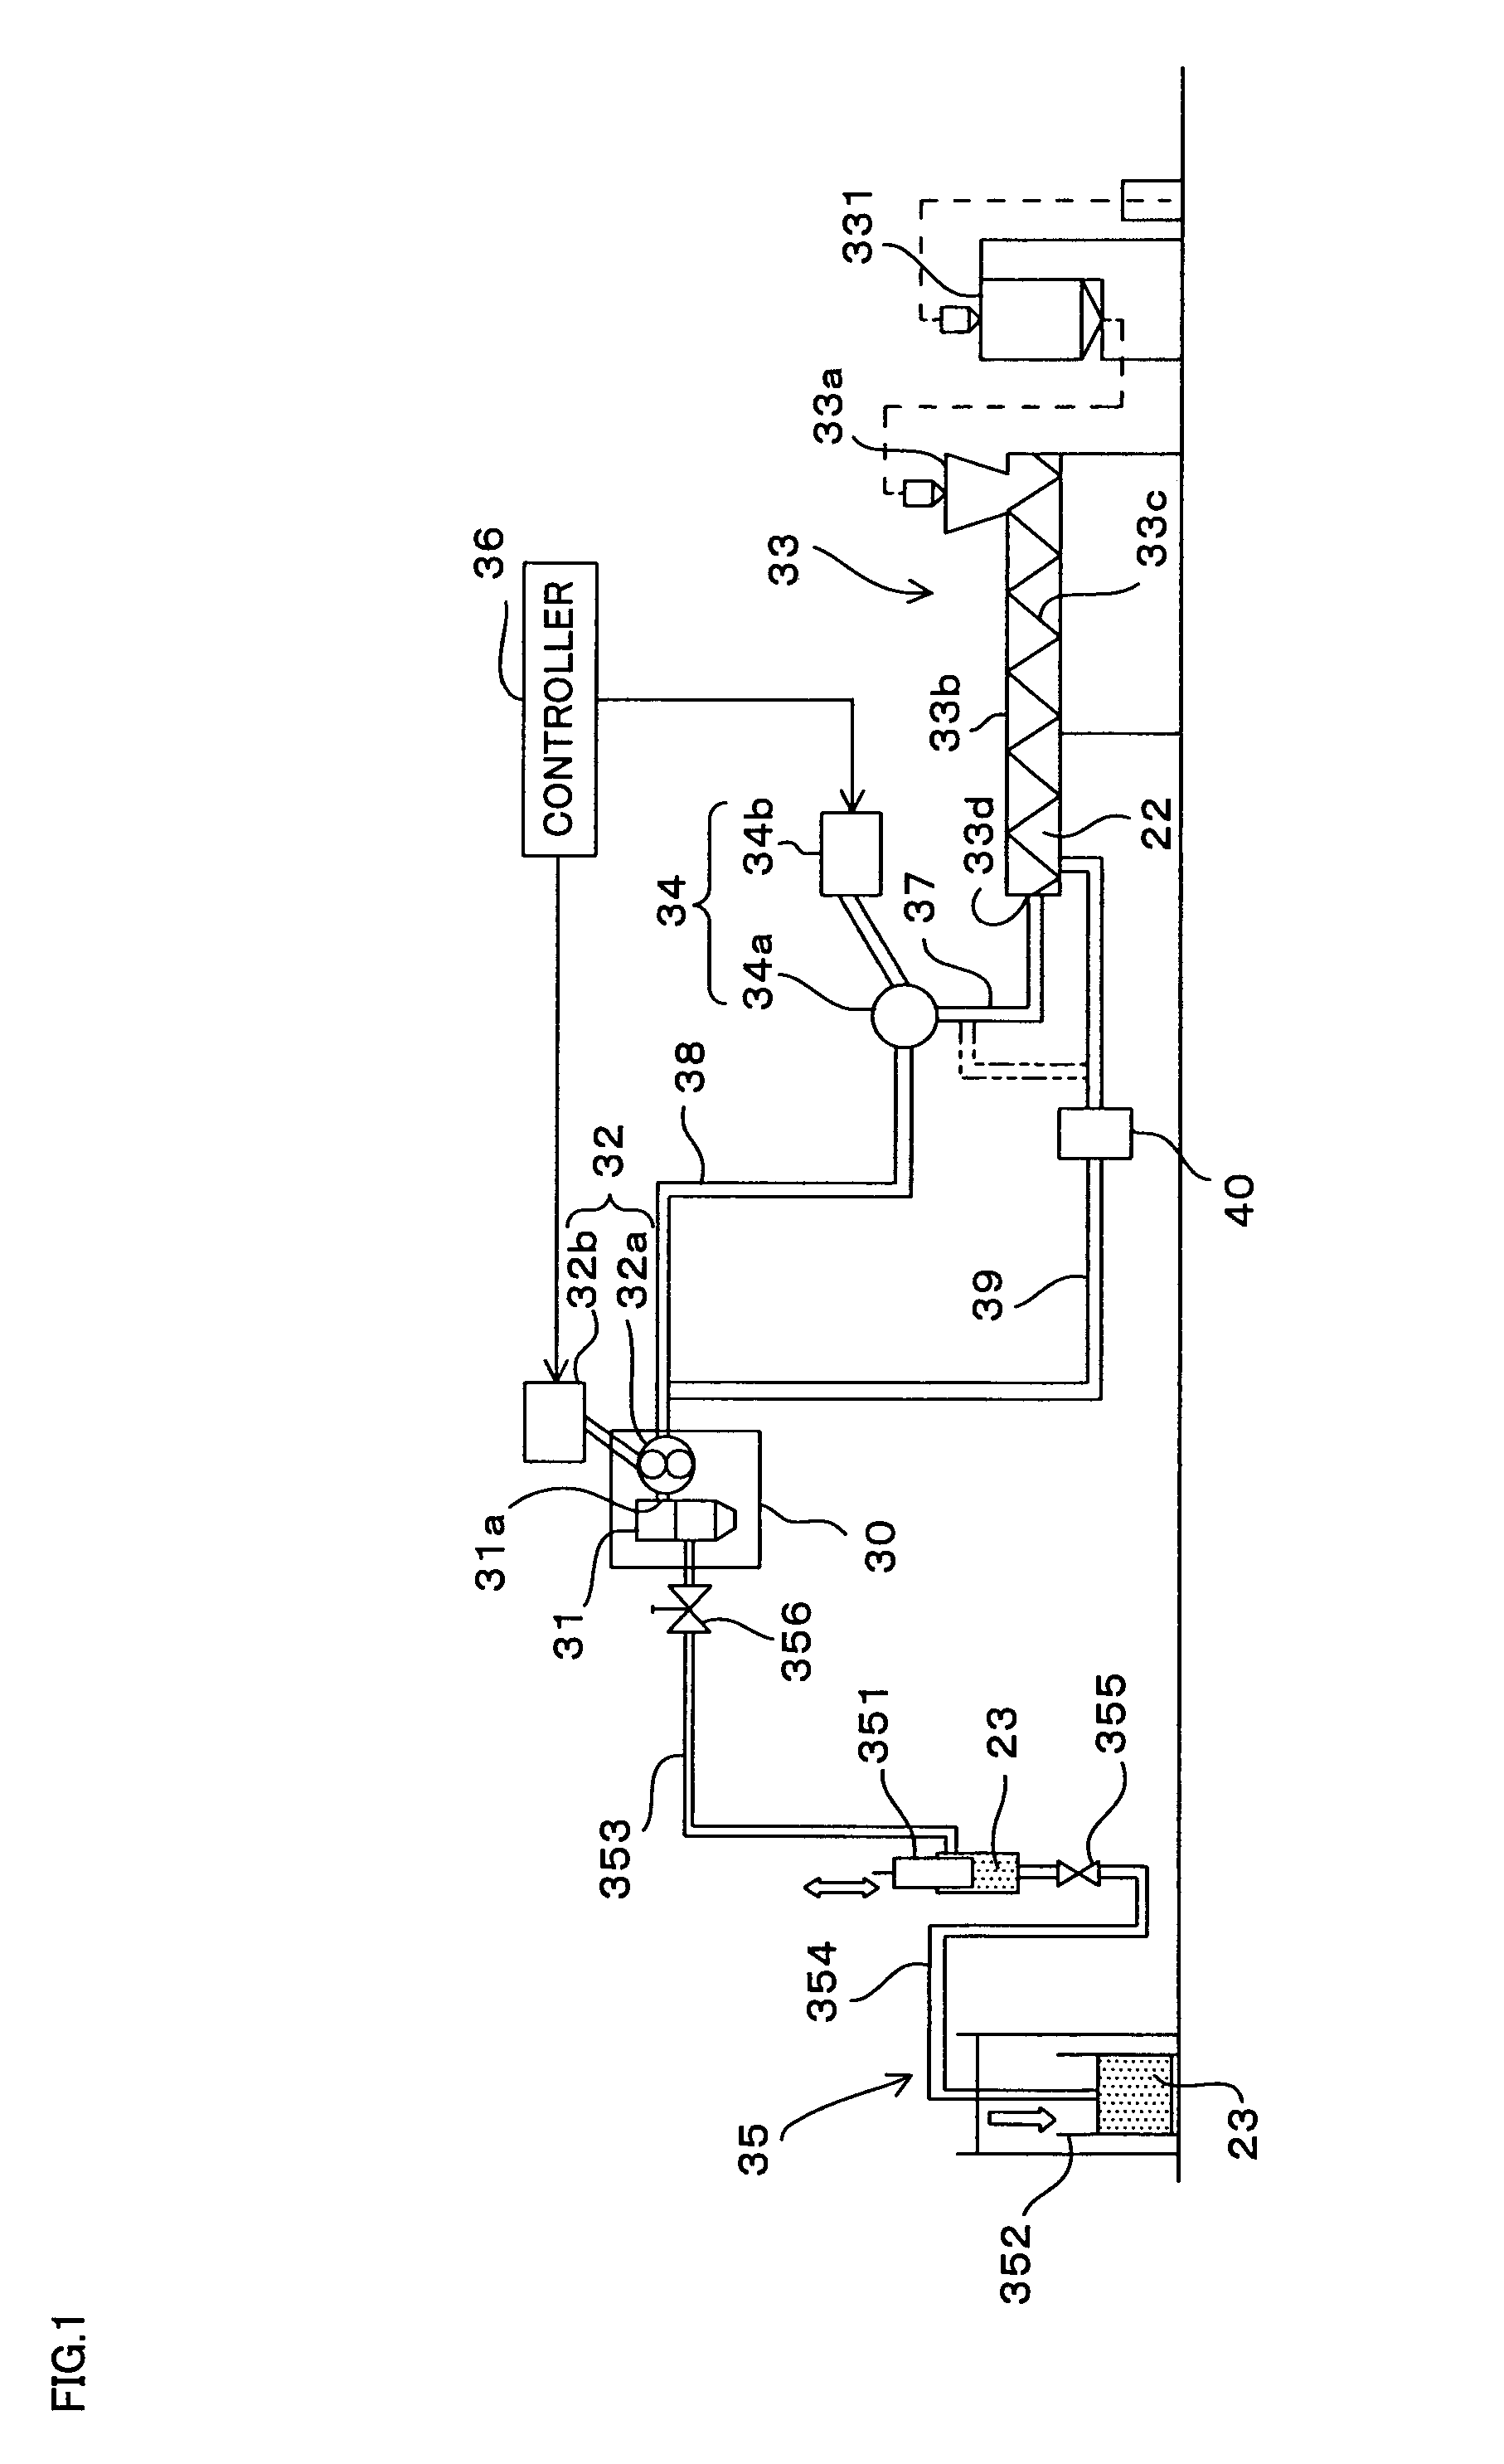 Method of and apparatus for molding glazing gasket onto multiplayer glass panel